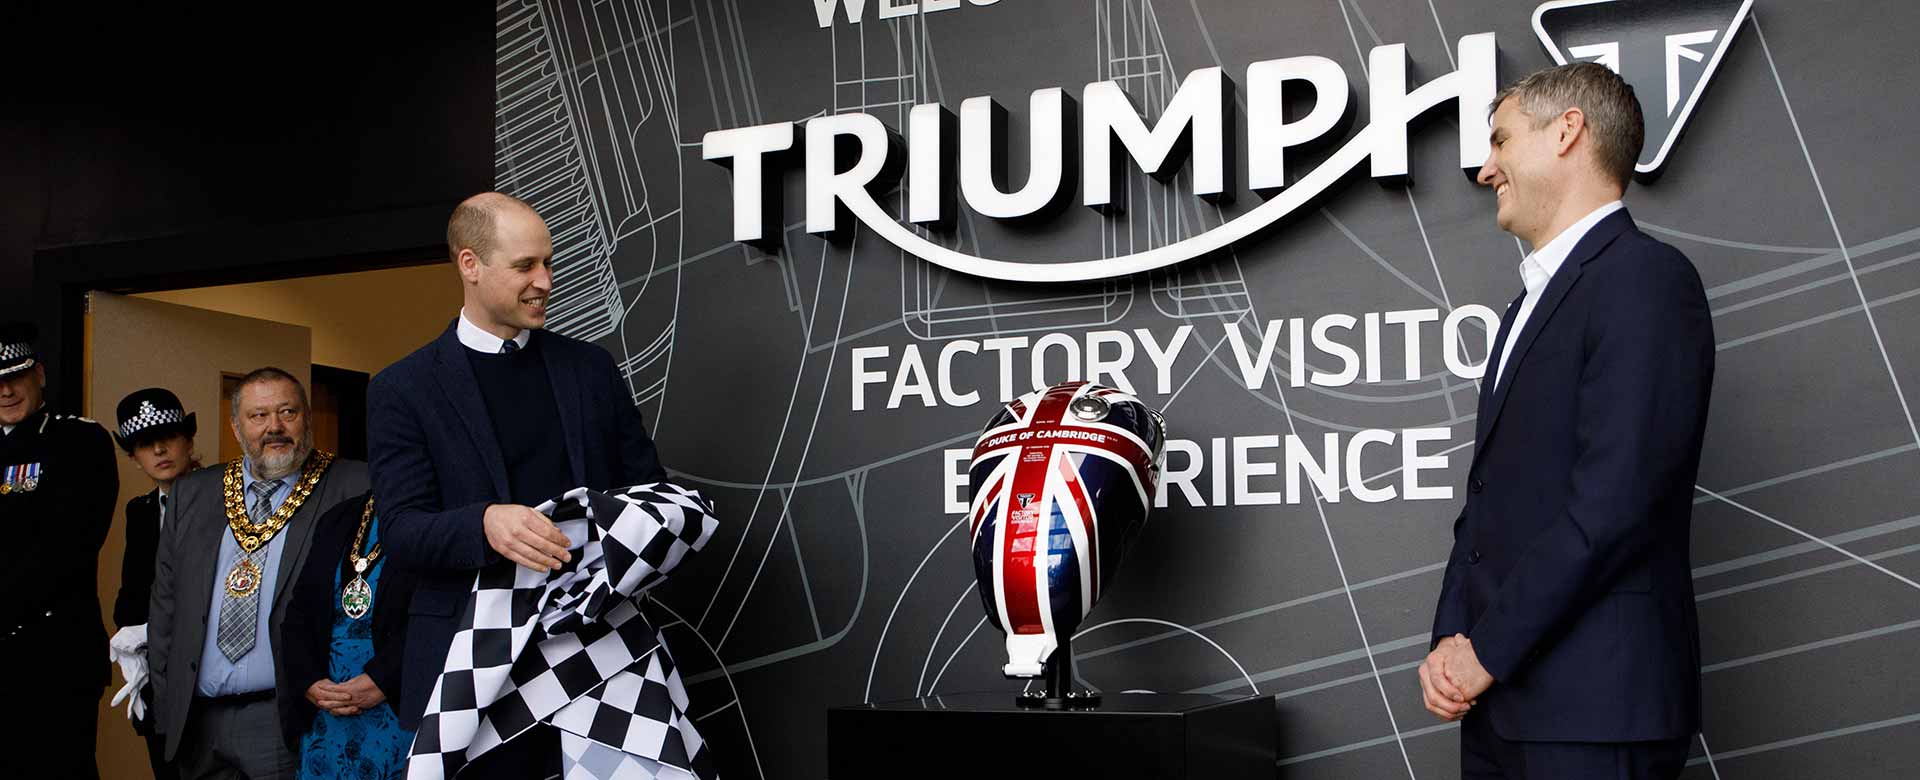 Triumph Factory Visitor Experience Prince William Guest